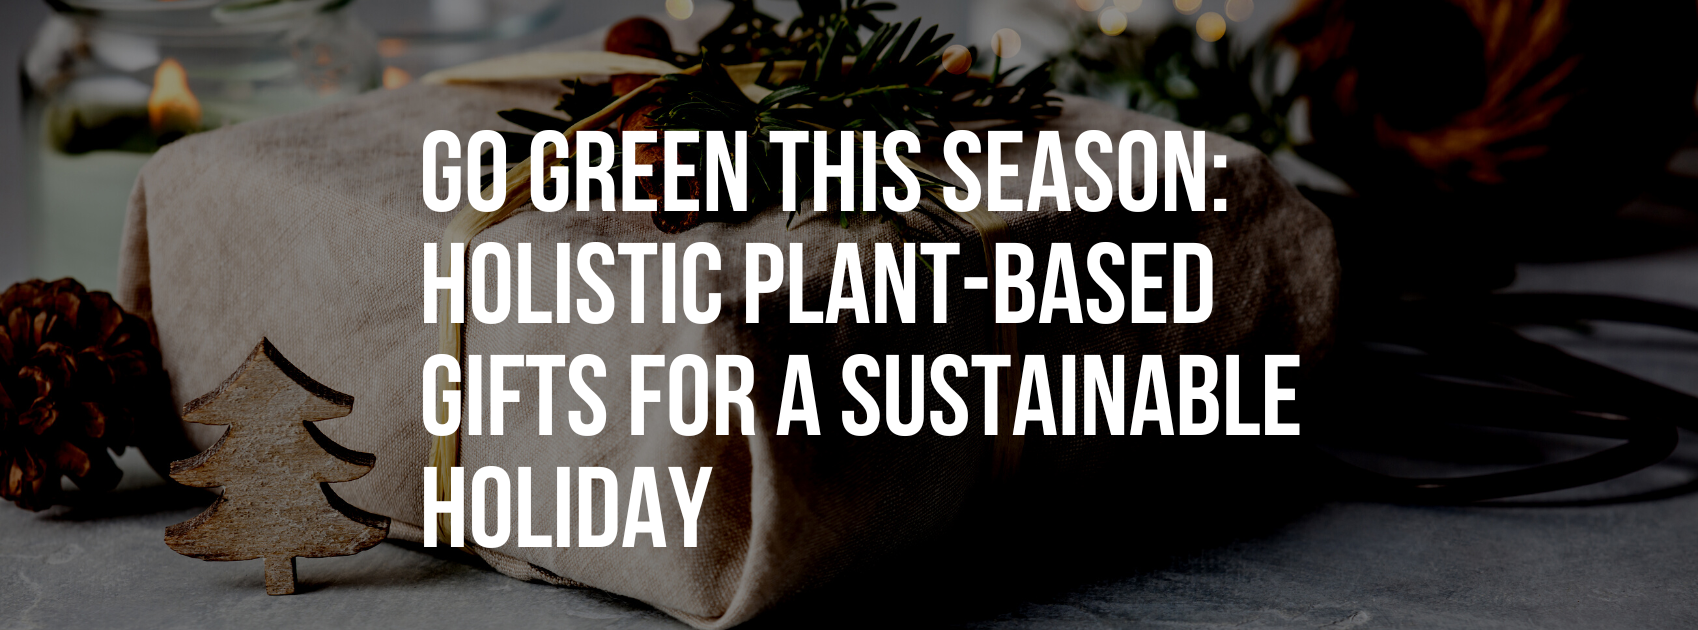 Go Green This Season: Holistic Plant-Based Gifts for a Sustainable Holiday